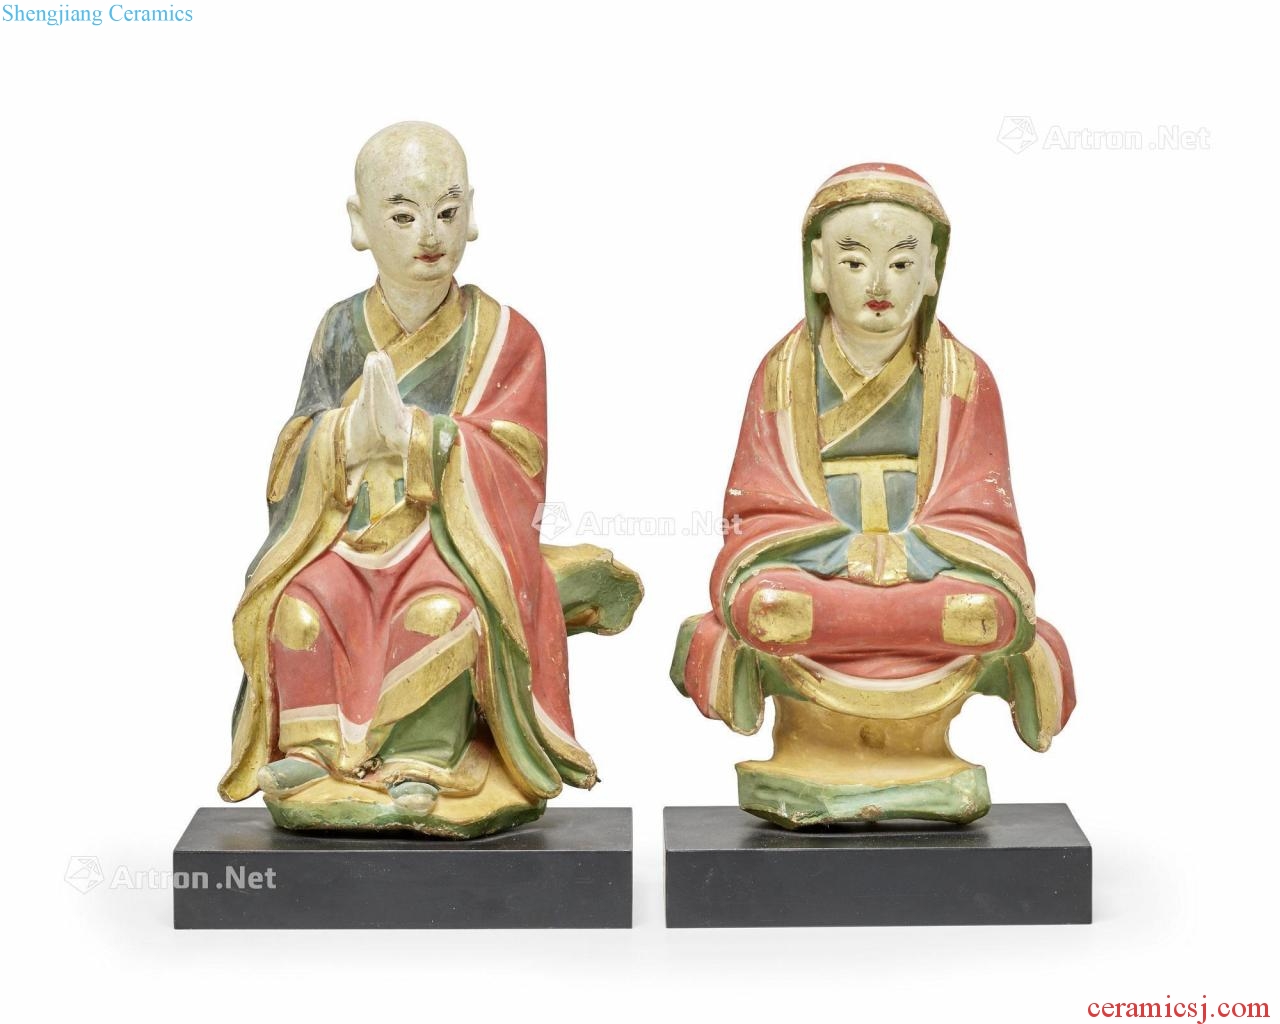 Ocean's yuan/Ming painted sculpture like two statues